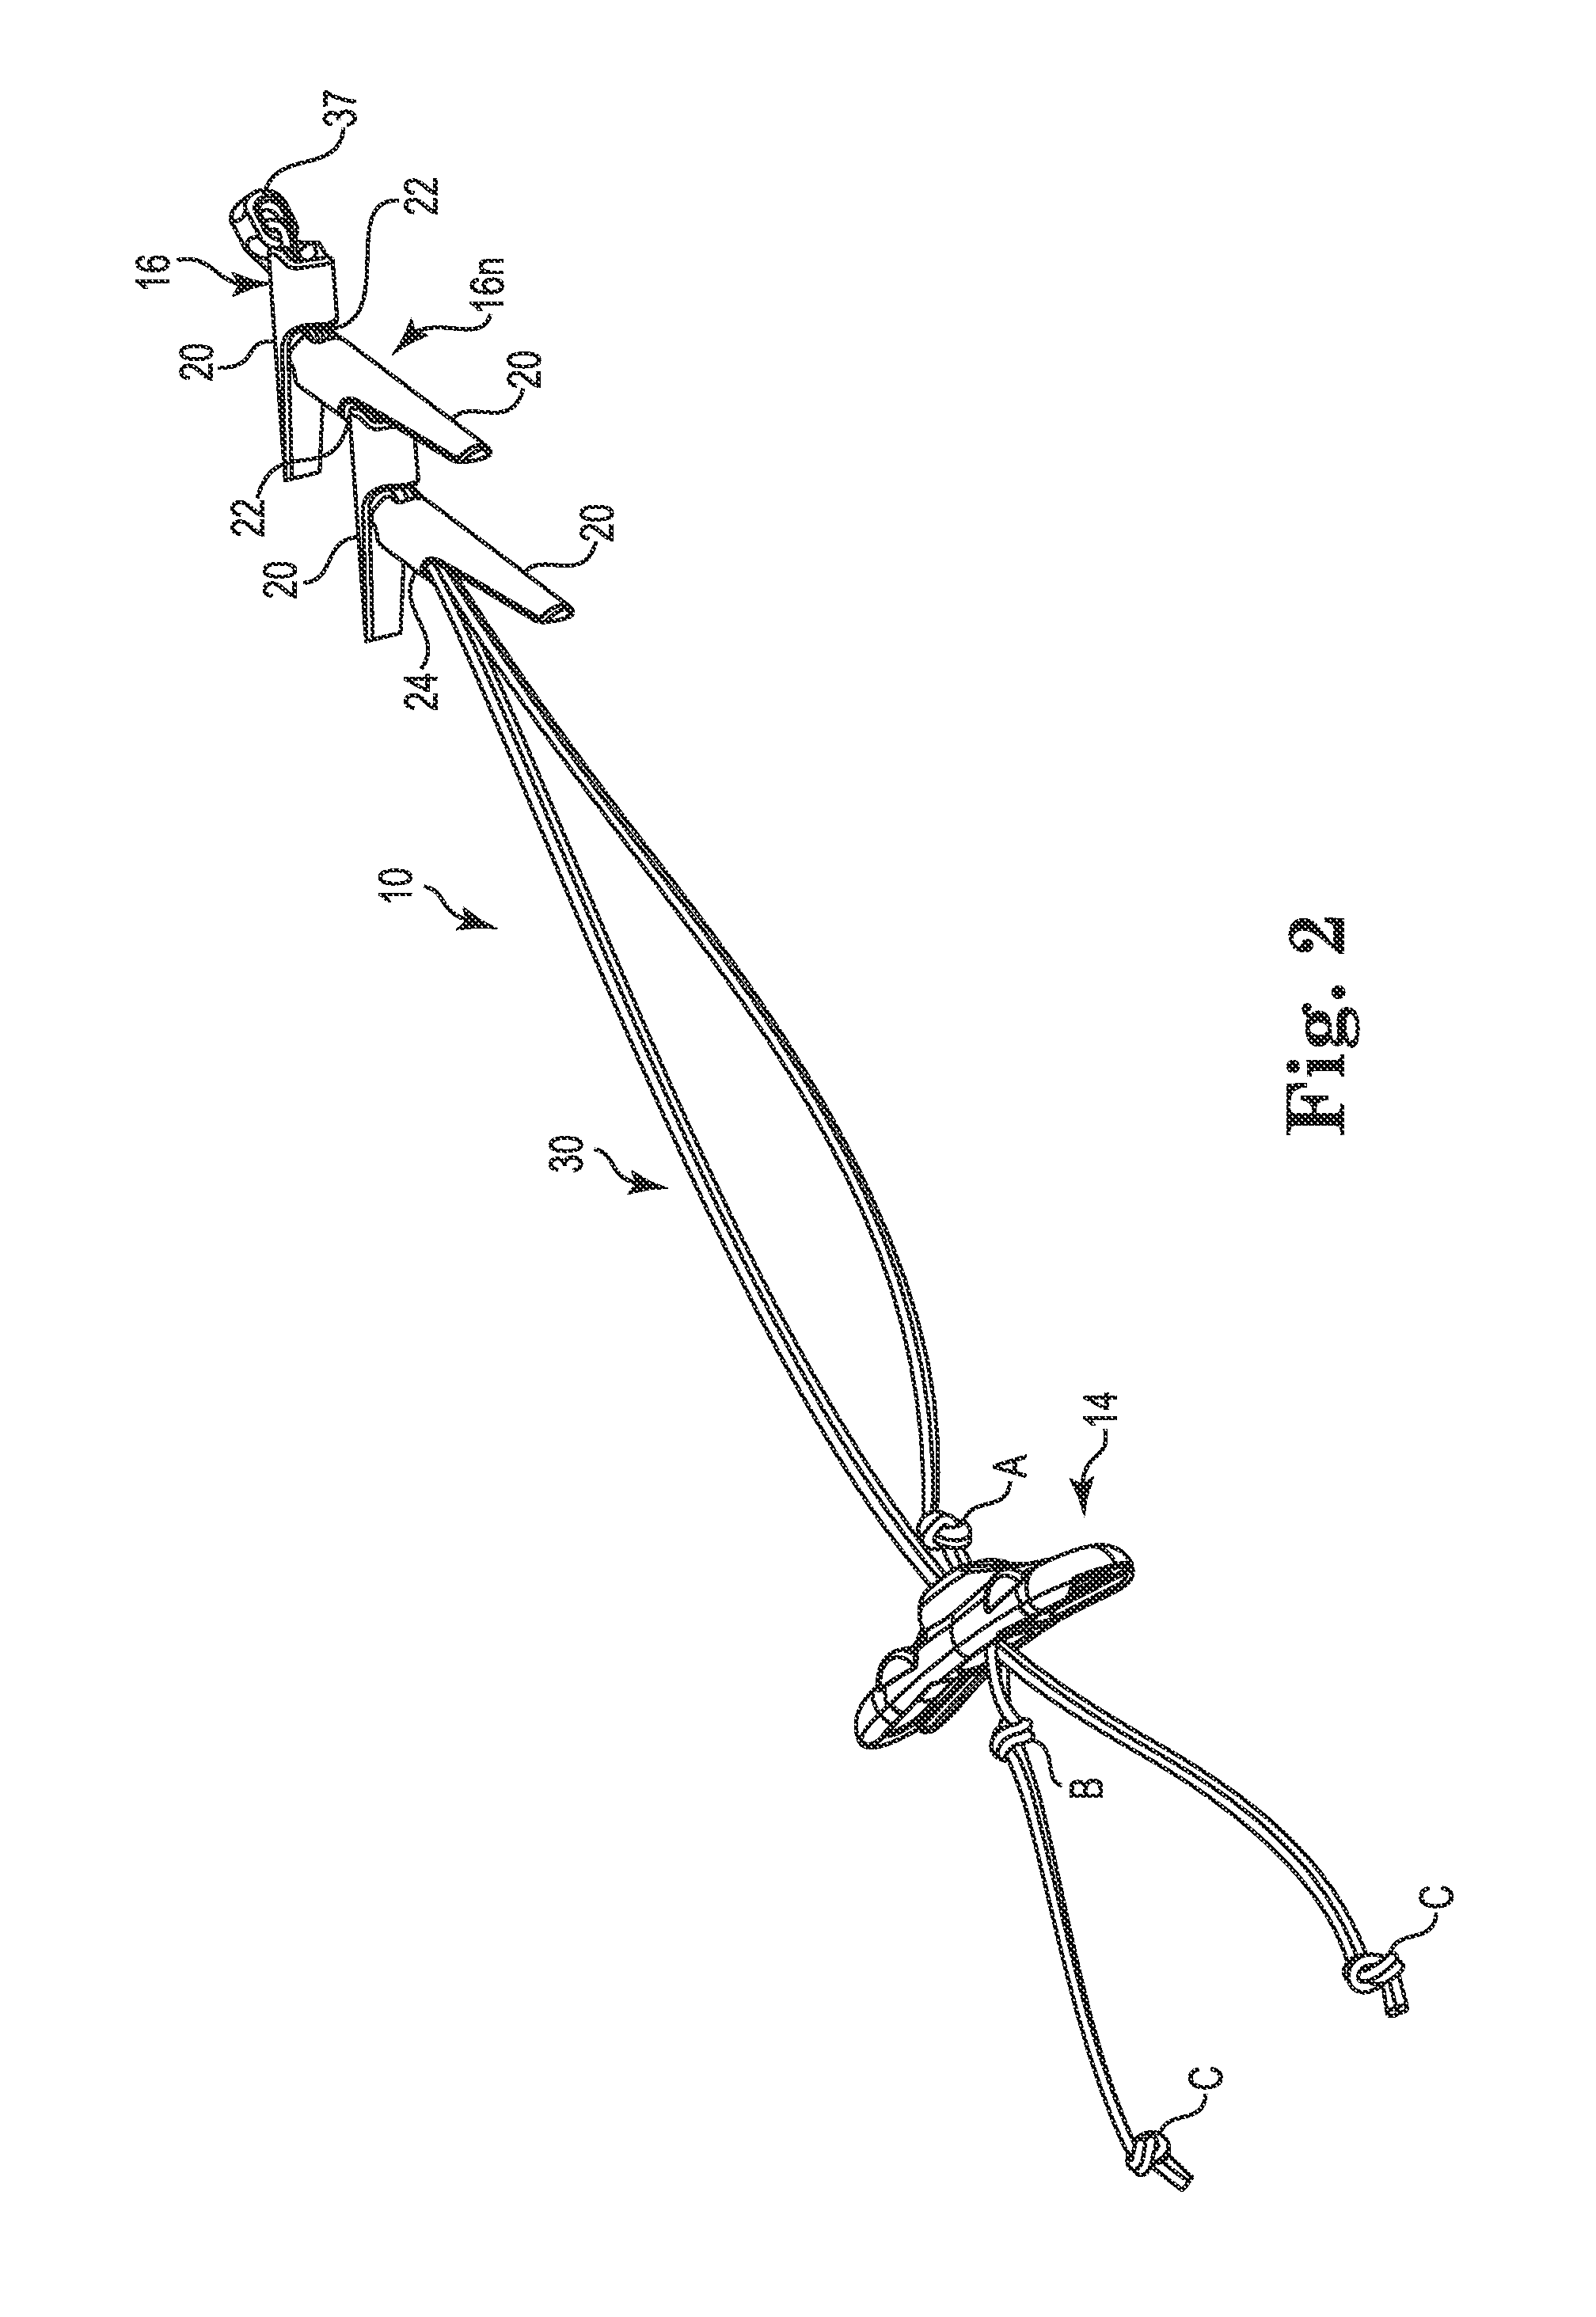 Surgical implant system and method